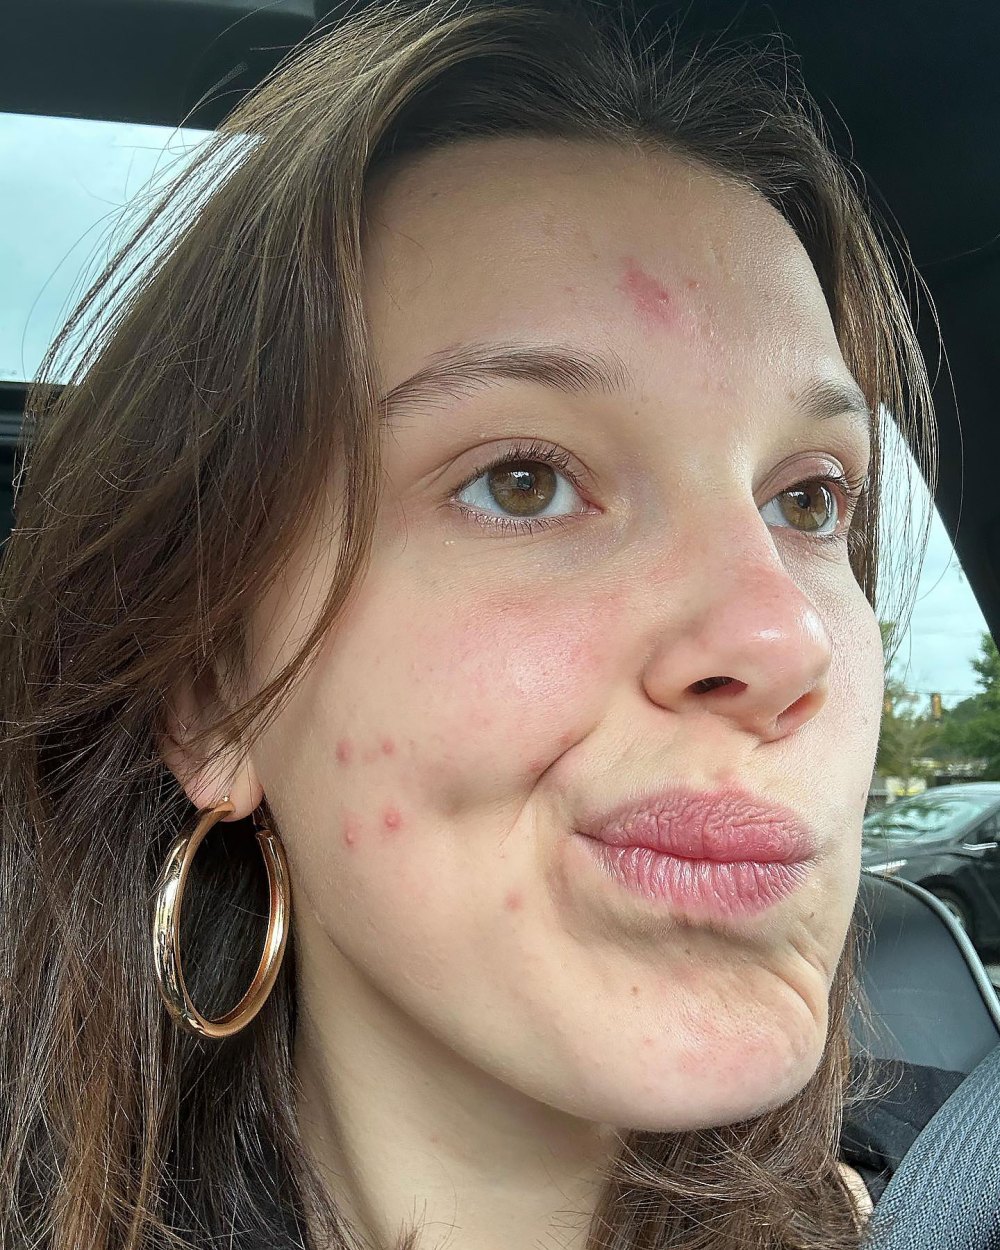 Millie Bobby Brown Shares Relatable Makeup-Free Snap of Her Acne 2